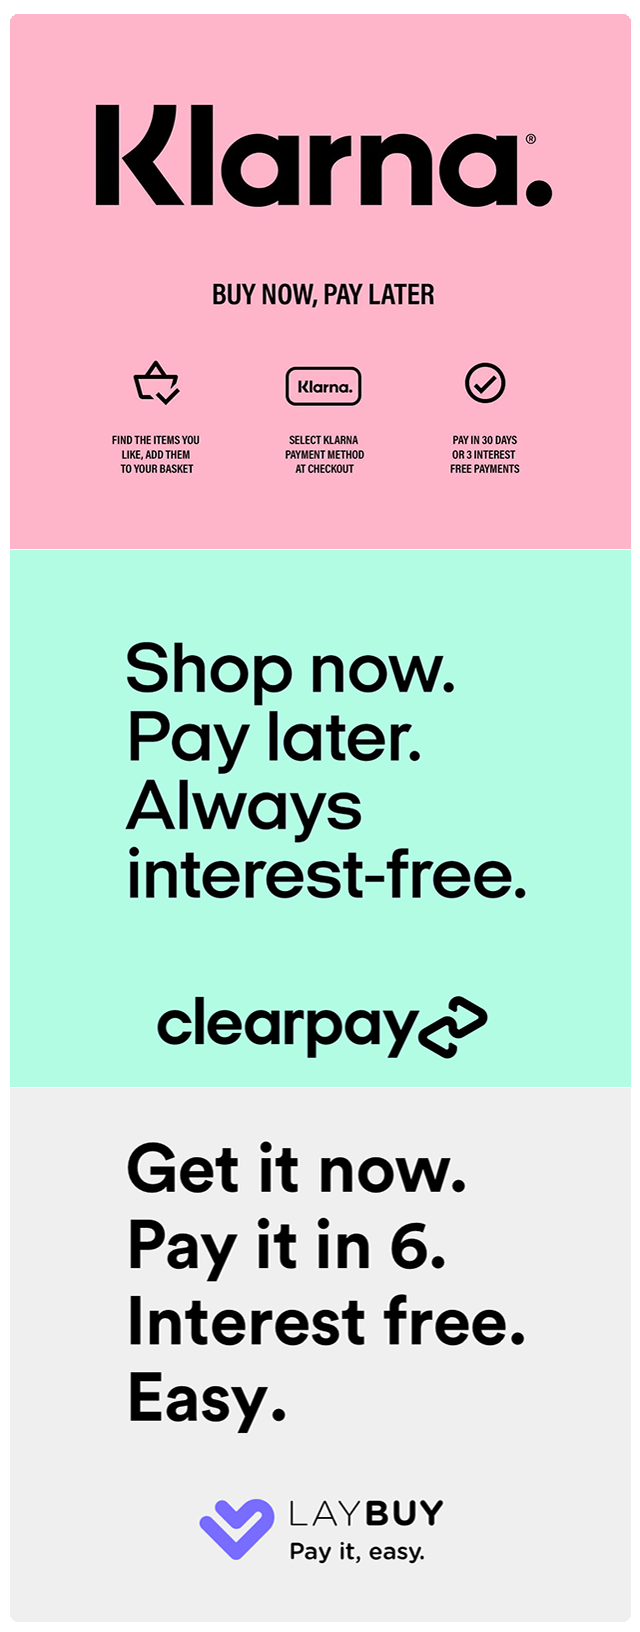 Klarna. BUY NOW, PAY LATER FINDTHEITEMS YOU IKE, ADD THEM. ASKET SELECTKLARNA PAYINGODAYS PAYMENT METHOD OR3INTEREST AT CHECKOUT FREE PAYMENTS Shop now. Pay later. Always interest-free. clearpayc Get it now. Pay it in 6. Interest free. Easy. LAYBUY Pay it, easy. 